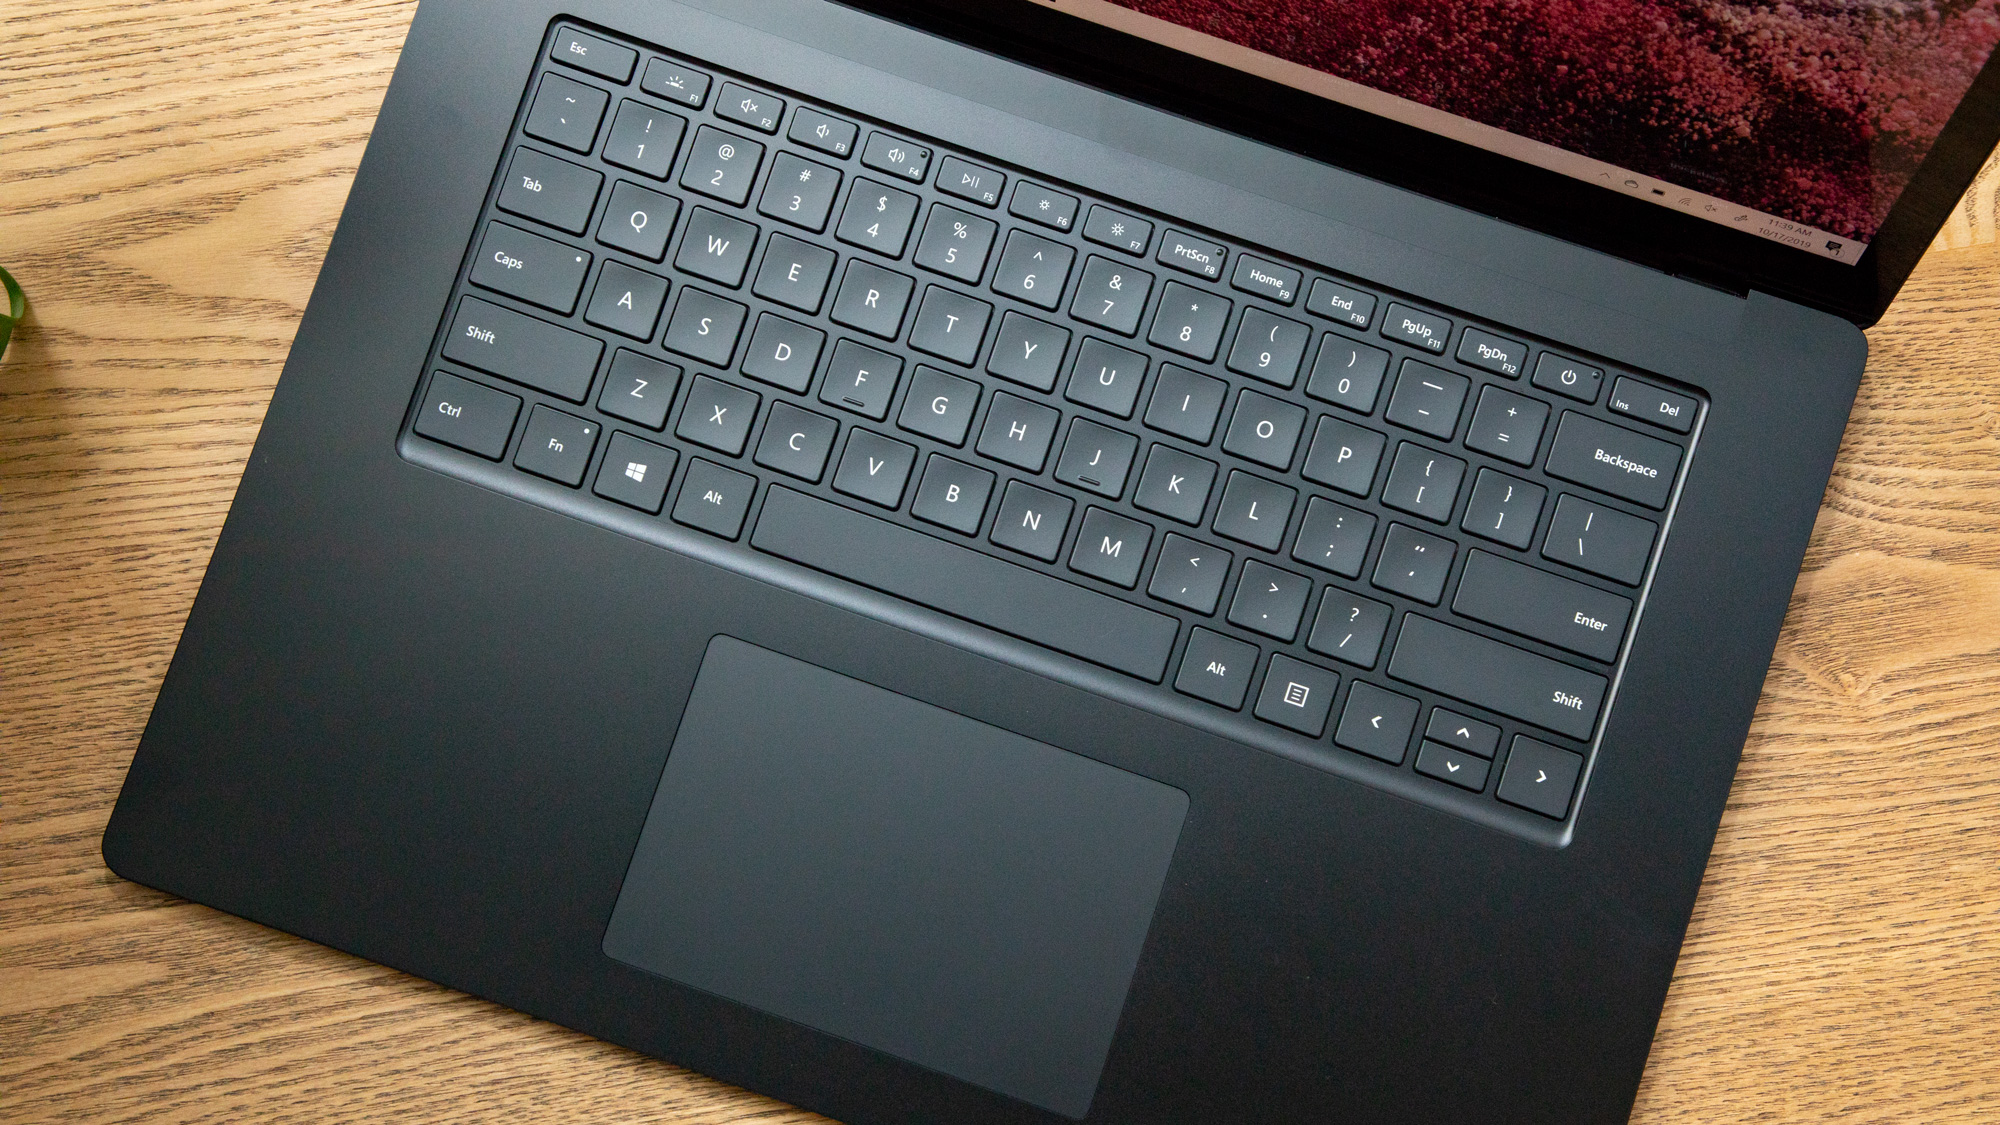 We rather enjoy the keyboard and trackpad as they are on the Surface Laptop 3.